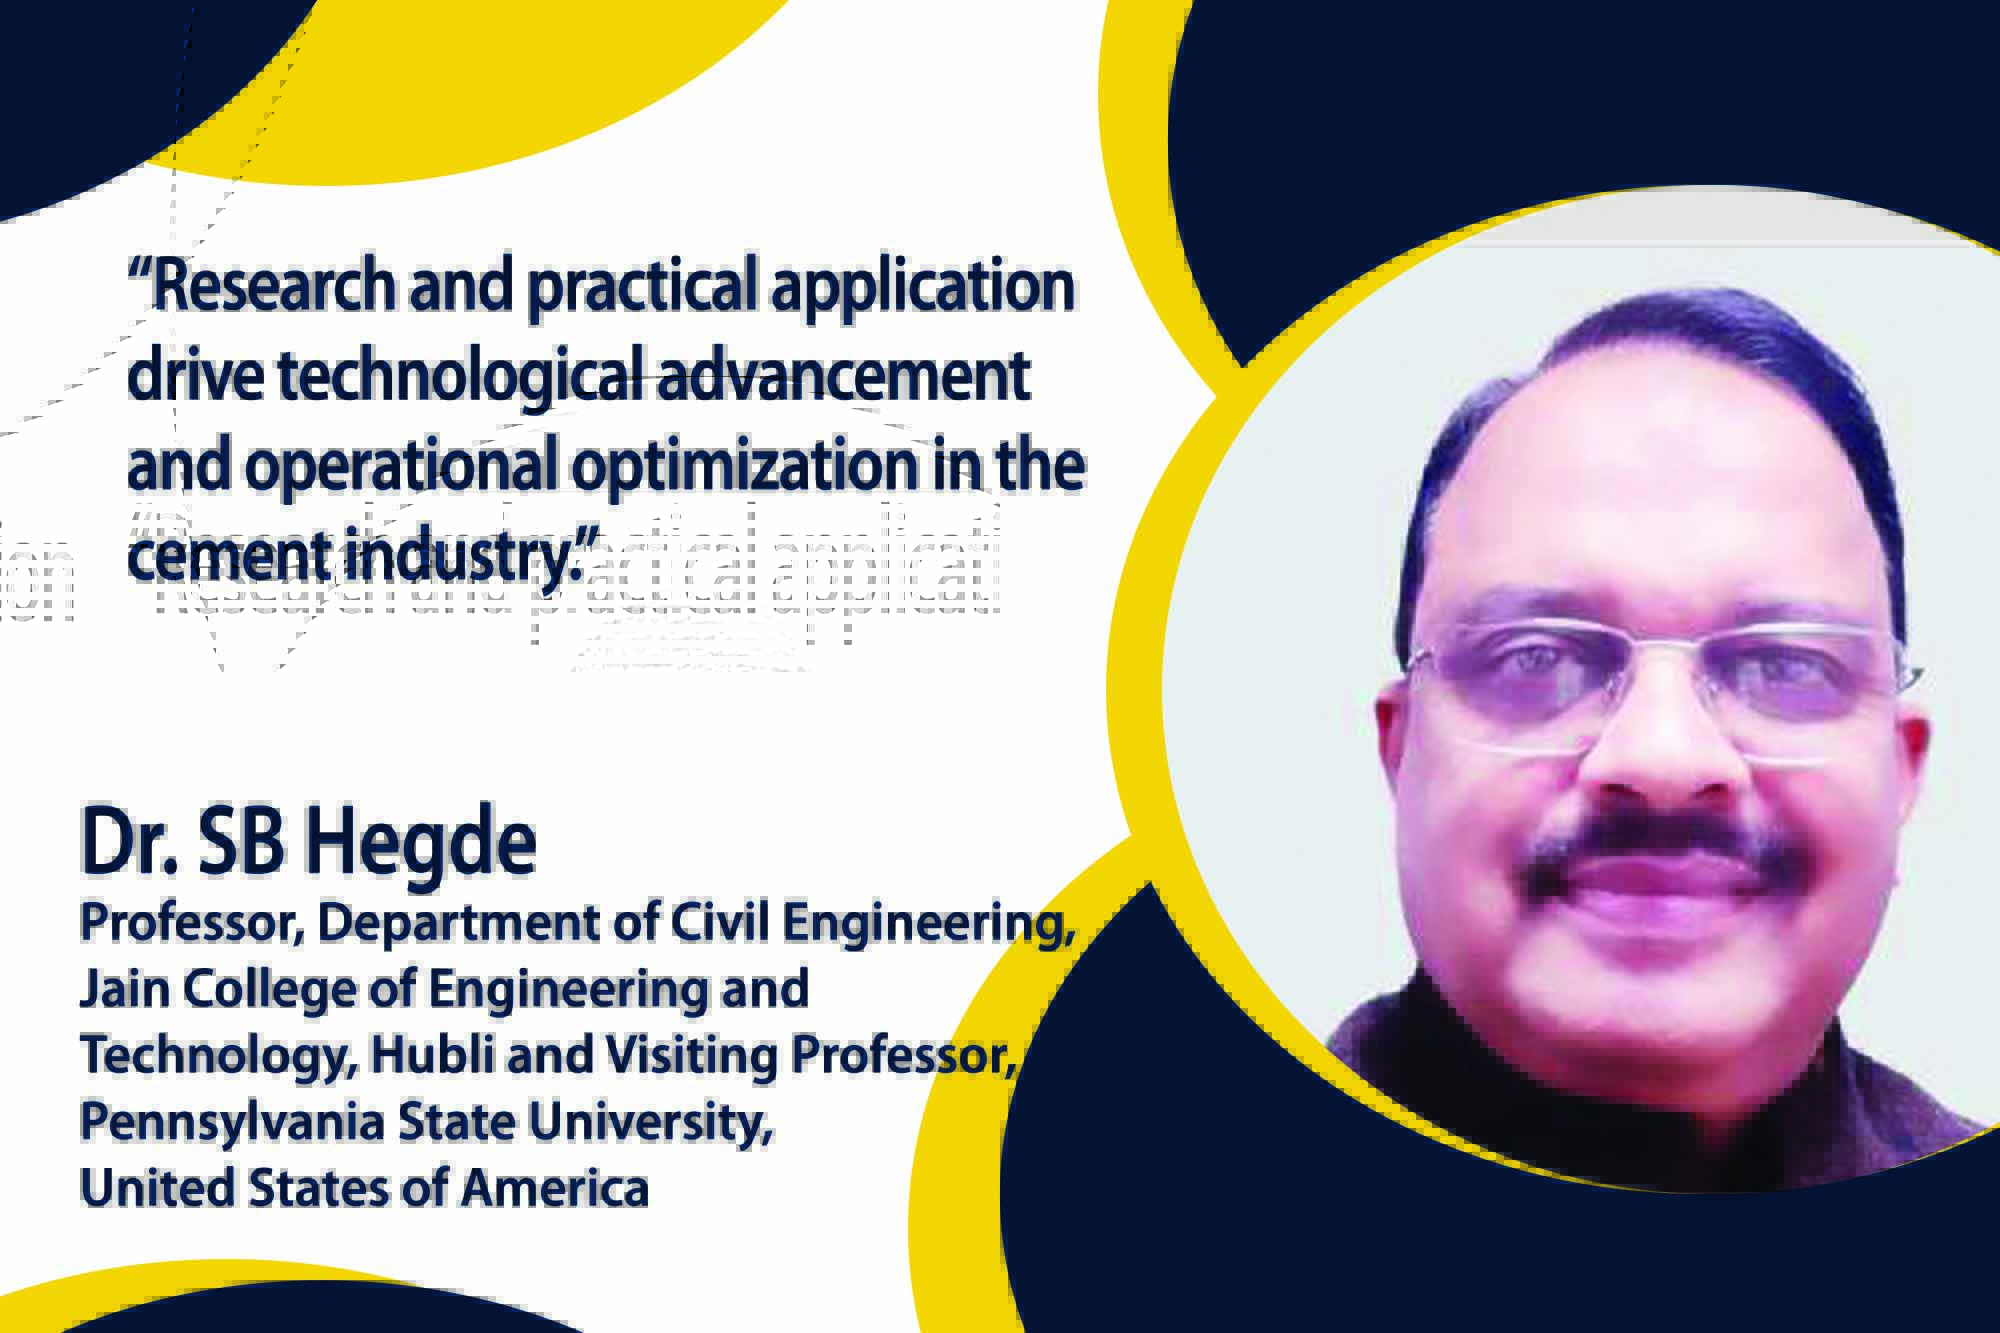 Dr. Hegde's extensive experience, with over 182 research papers and six patents to his credit, provides valuable insights into pivotal research findings and technological advancements in cement technology.